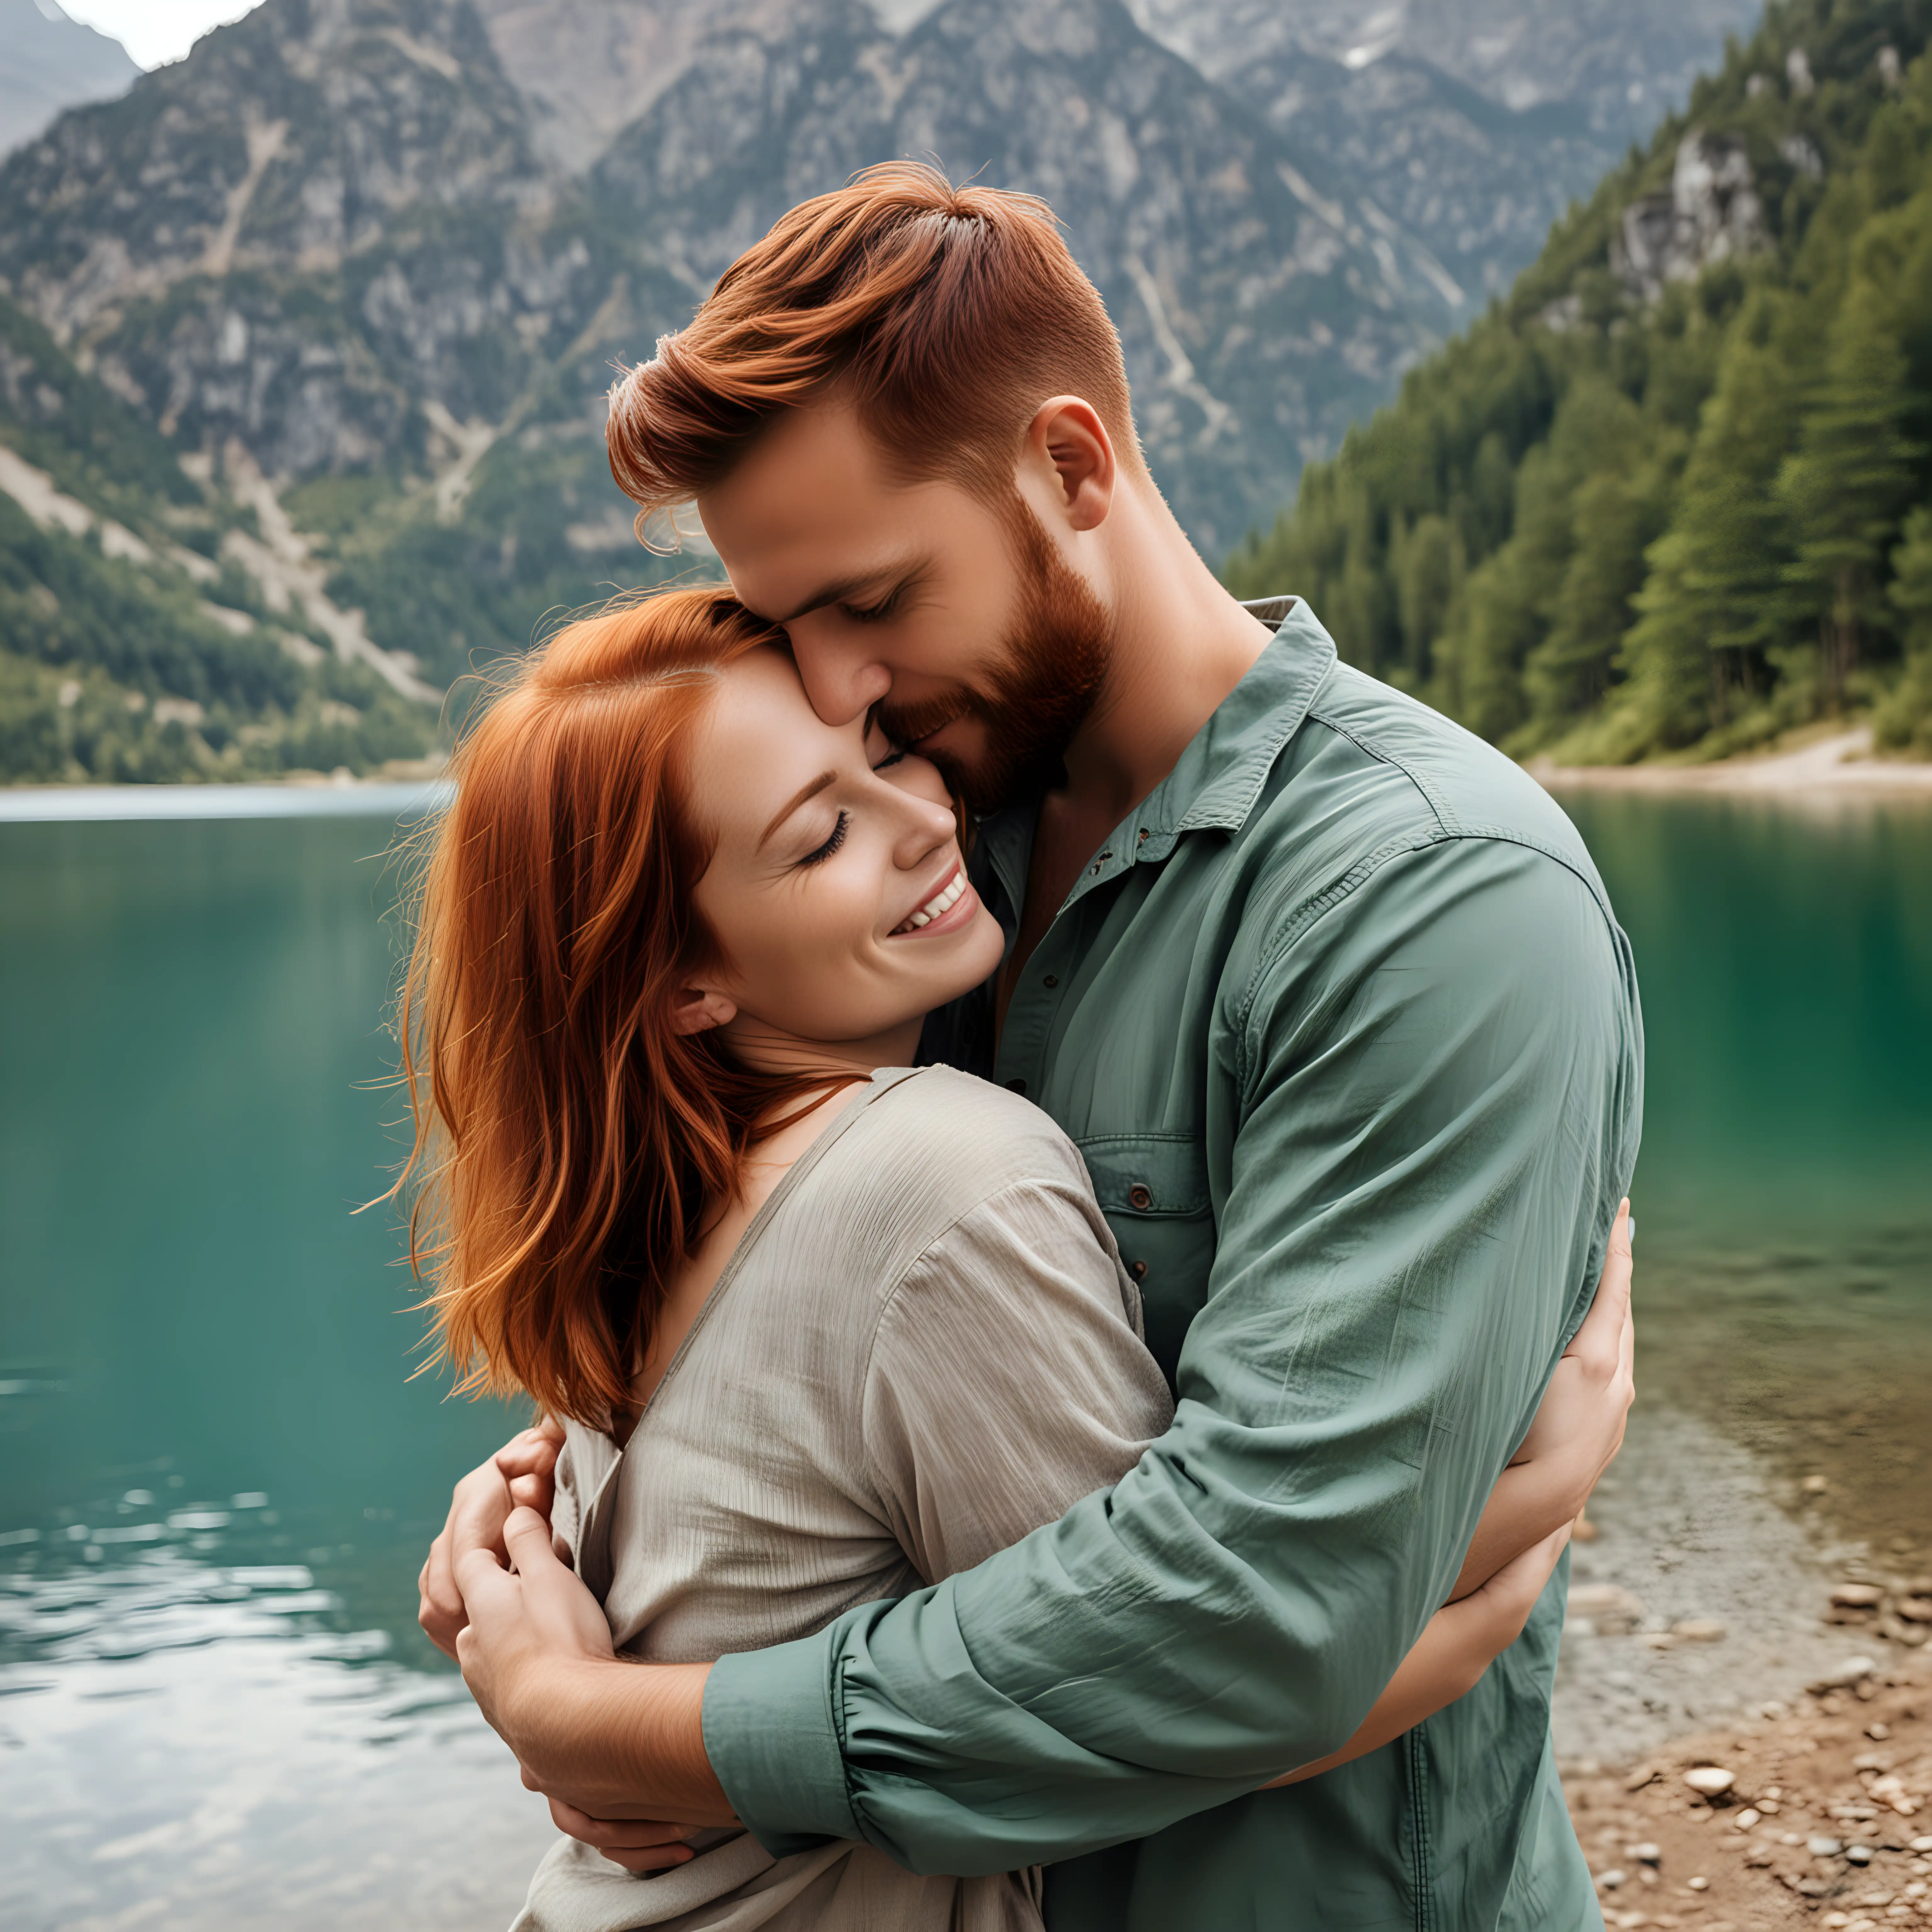 woman with red hair, man with a short beard and short brown hair hugging by a mountain lake
